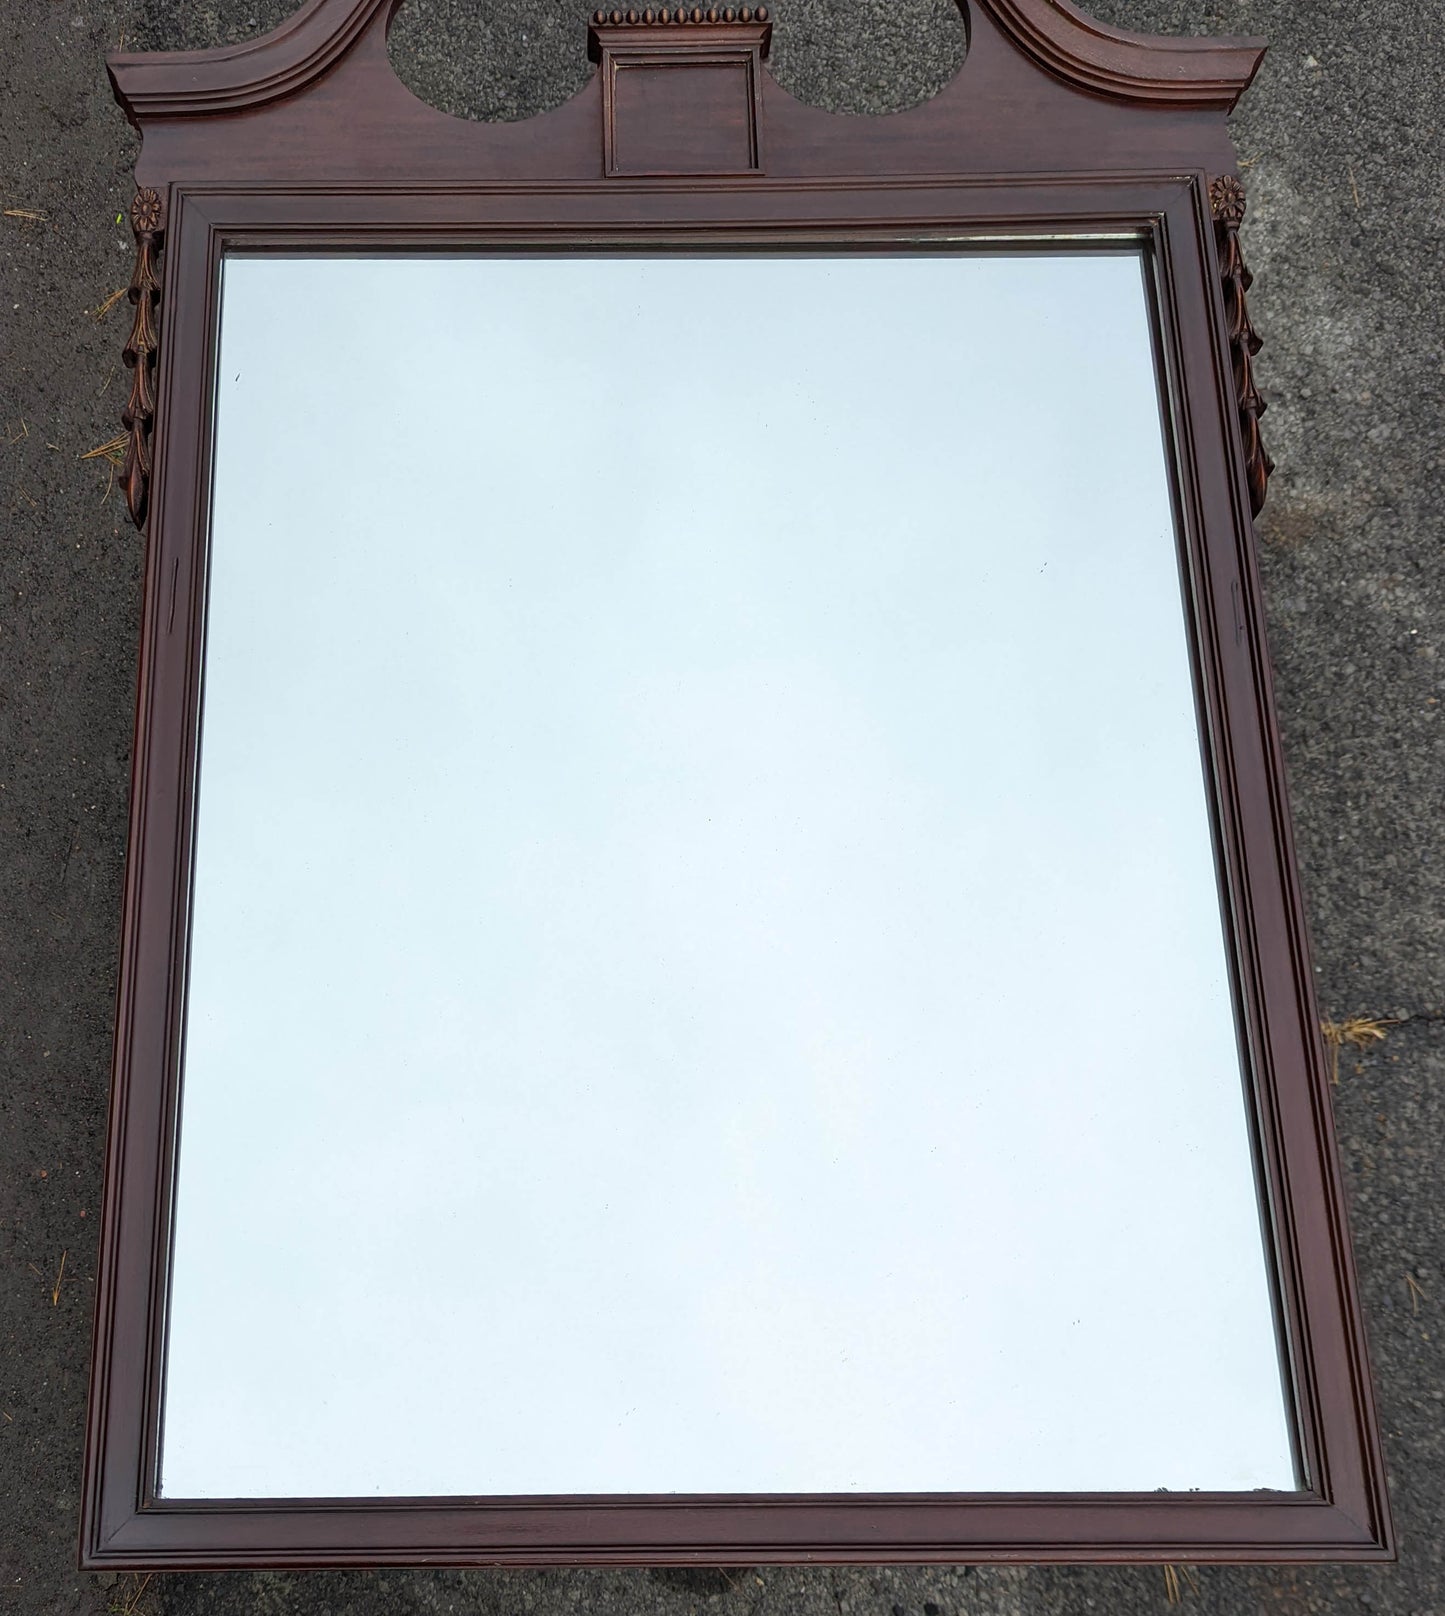 30"x41" Antique Vintage Old Solid Mahogany Wood Wooden Hanging Wall Hanging Mirror Glass Ornate Decorative Chippendale Hepplewhite Style